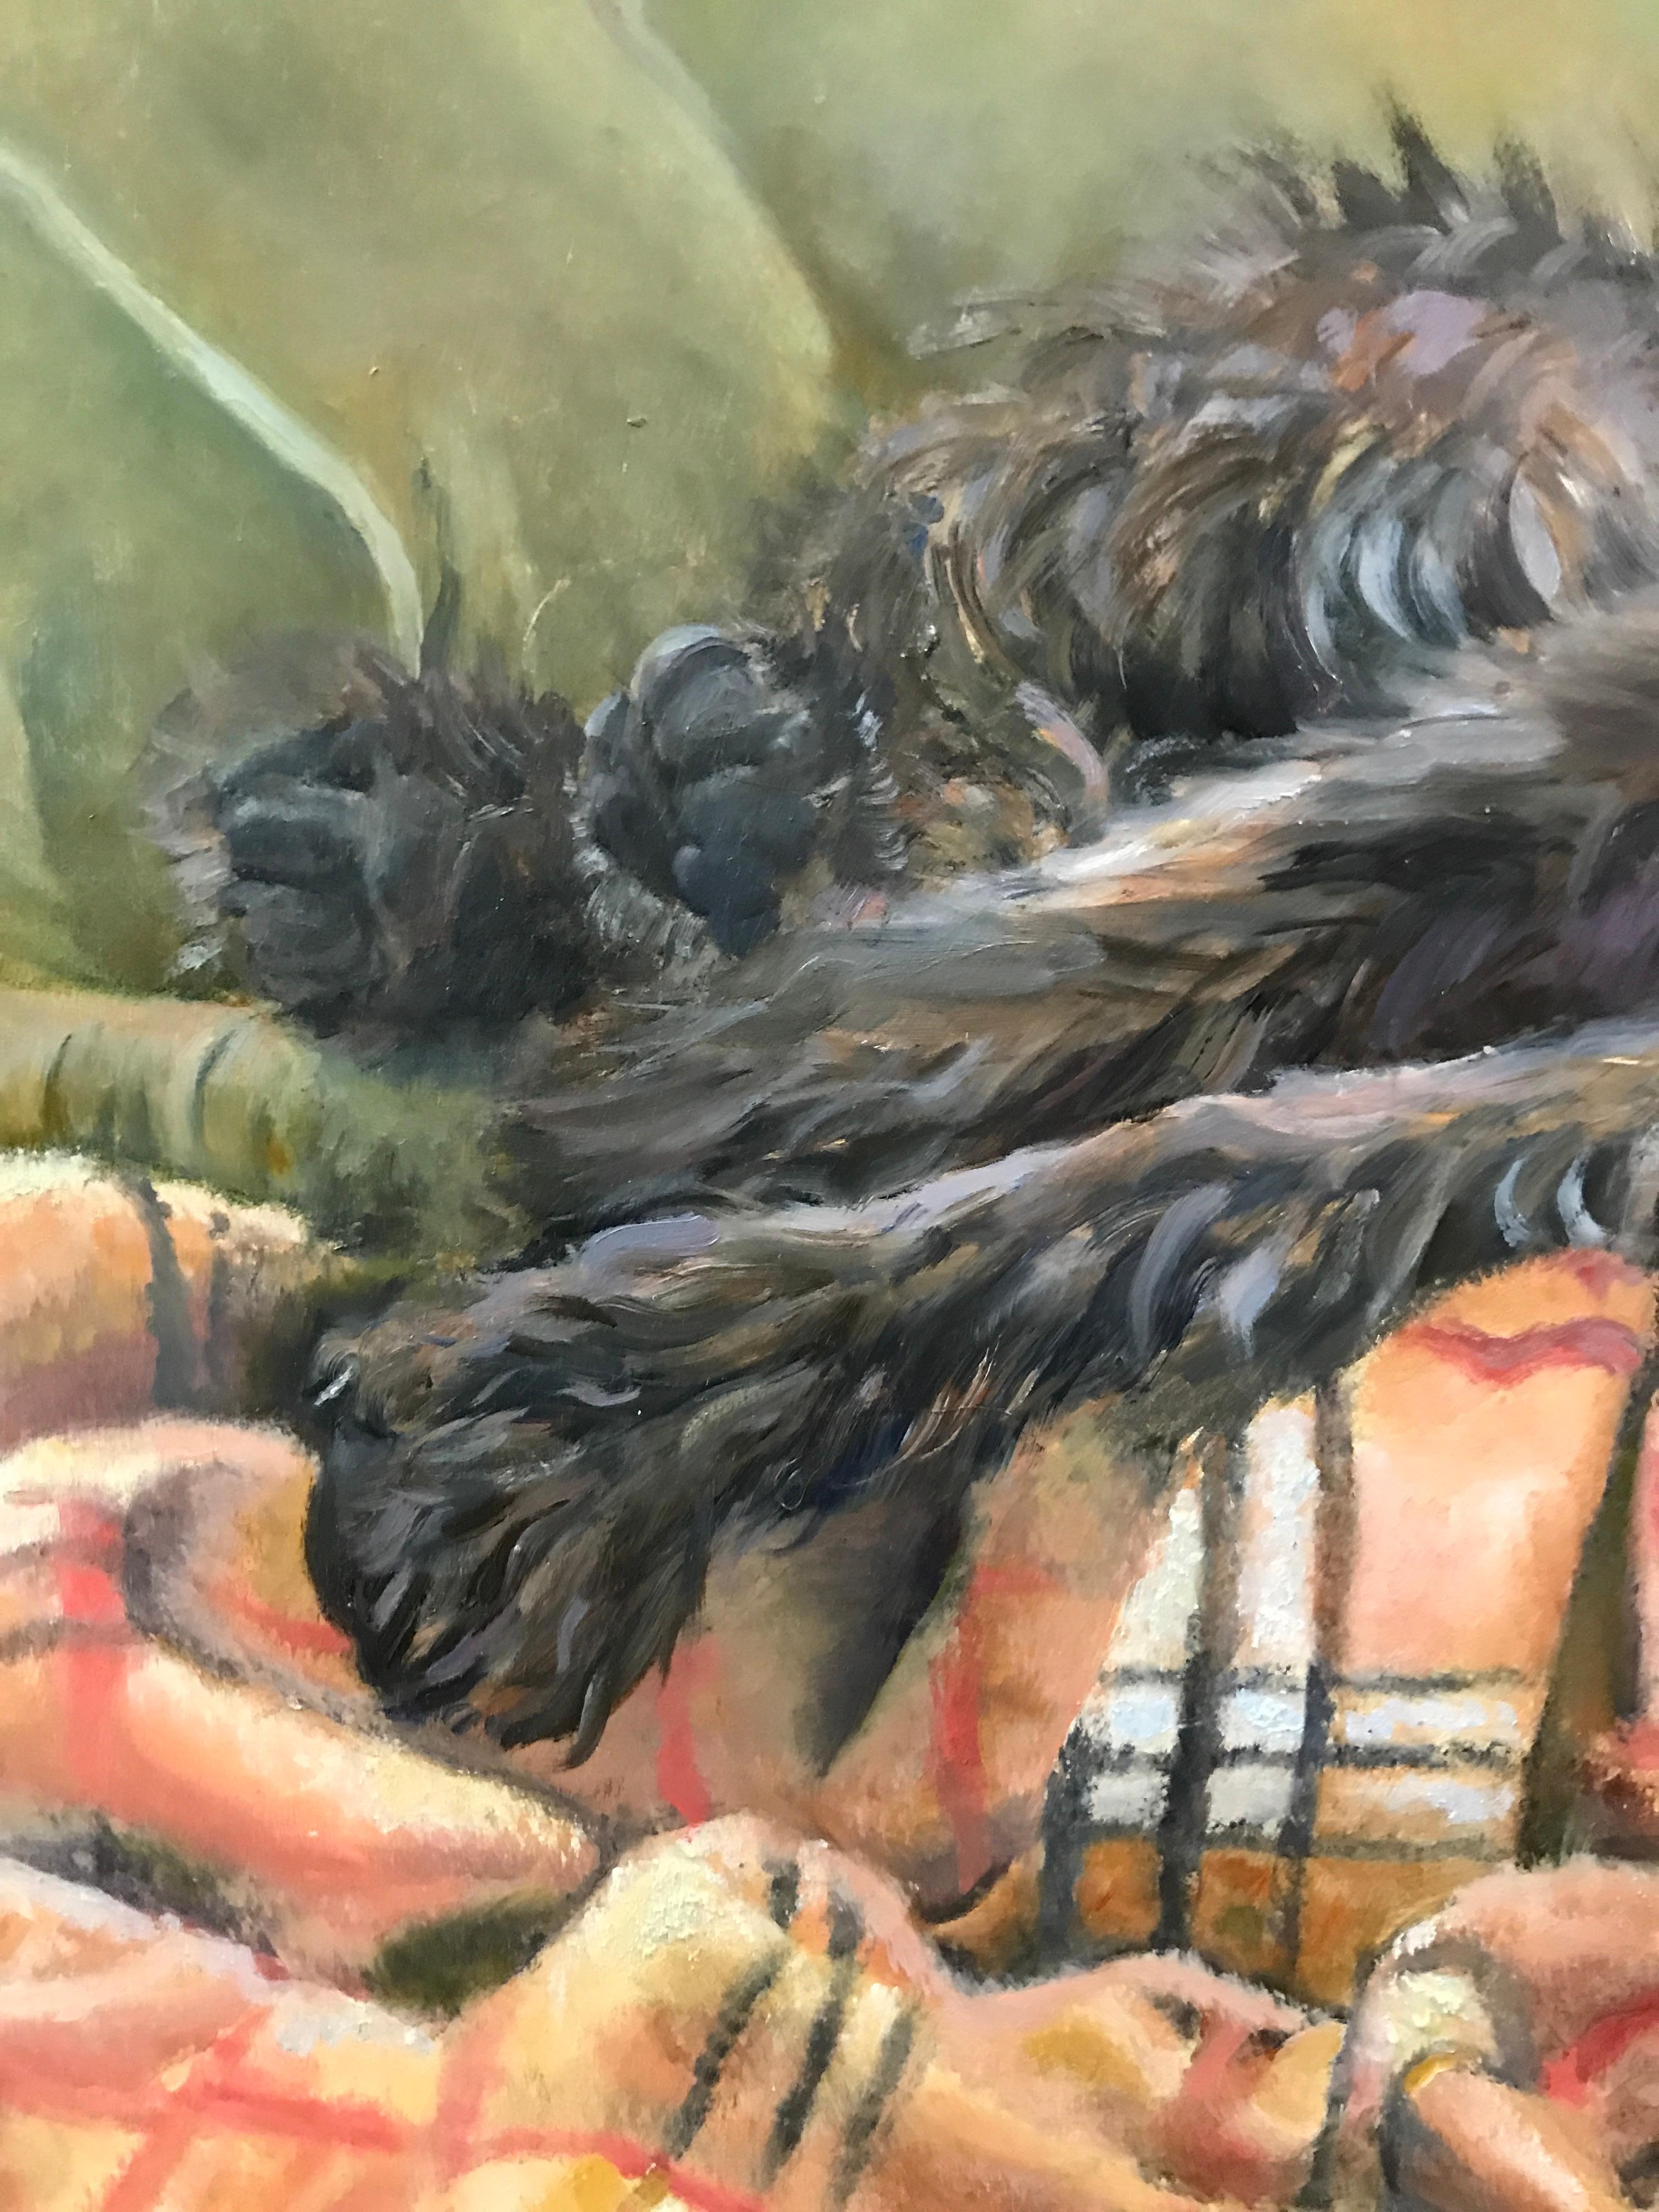 Wirehaired Griffon dog lounging on a sofa  'A Penny for Your Thoughts' intrigues - Realist Painting by Beth Carlson